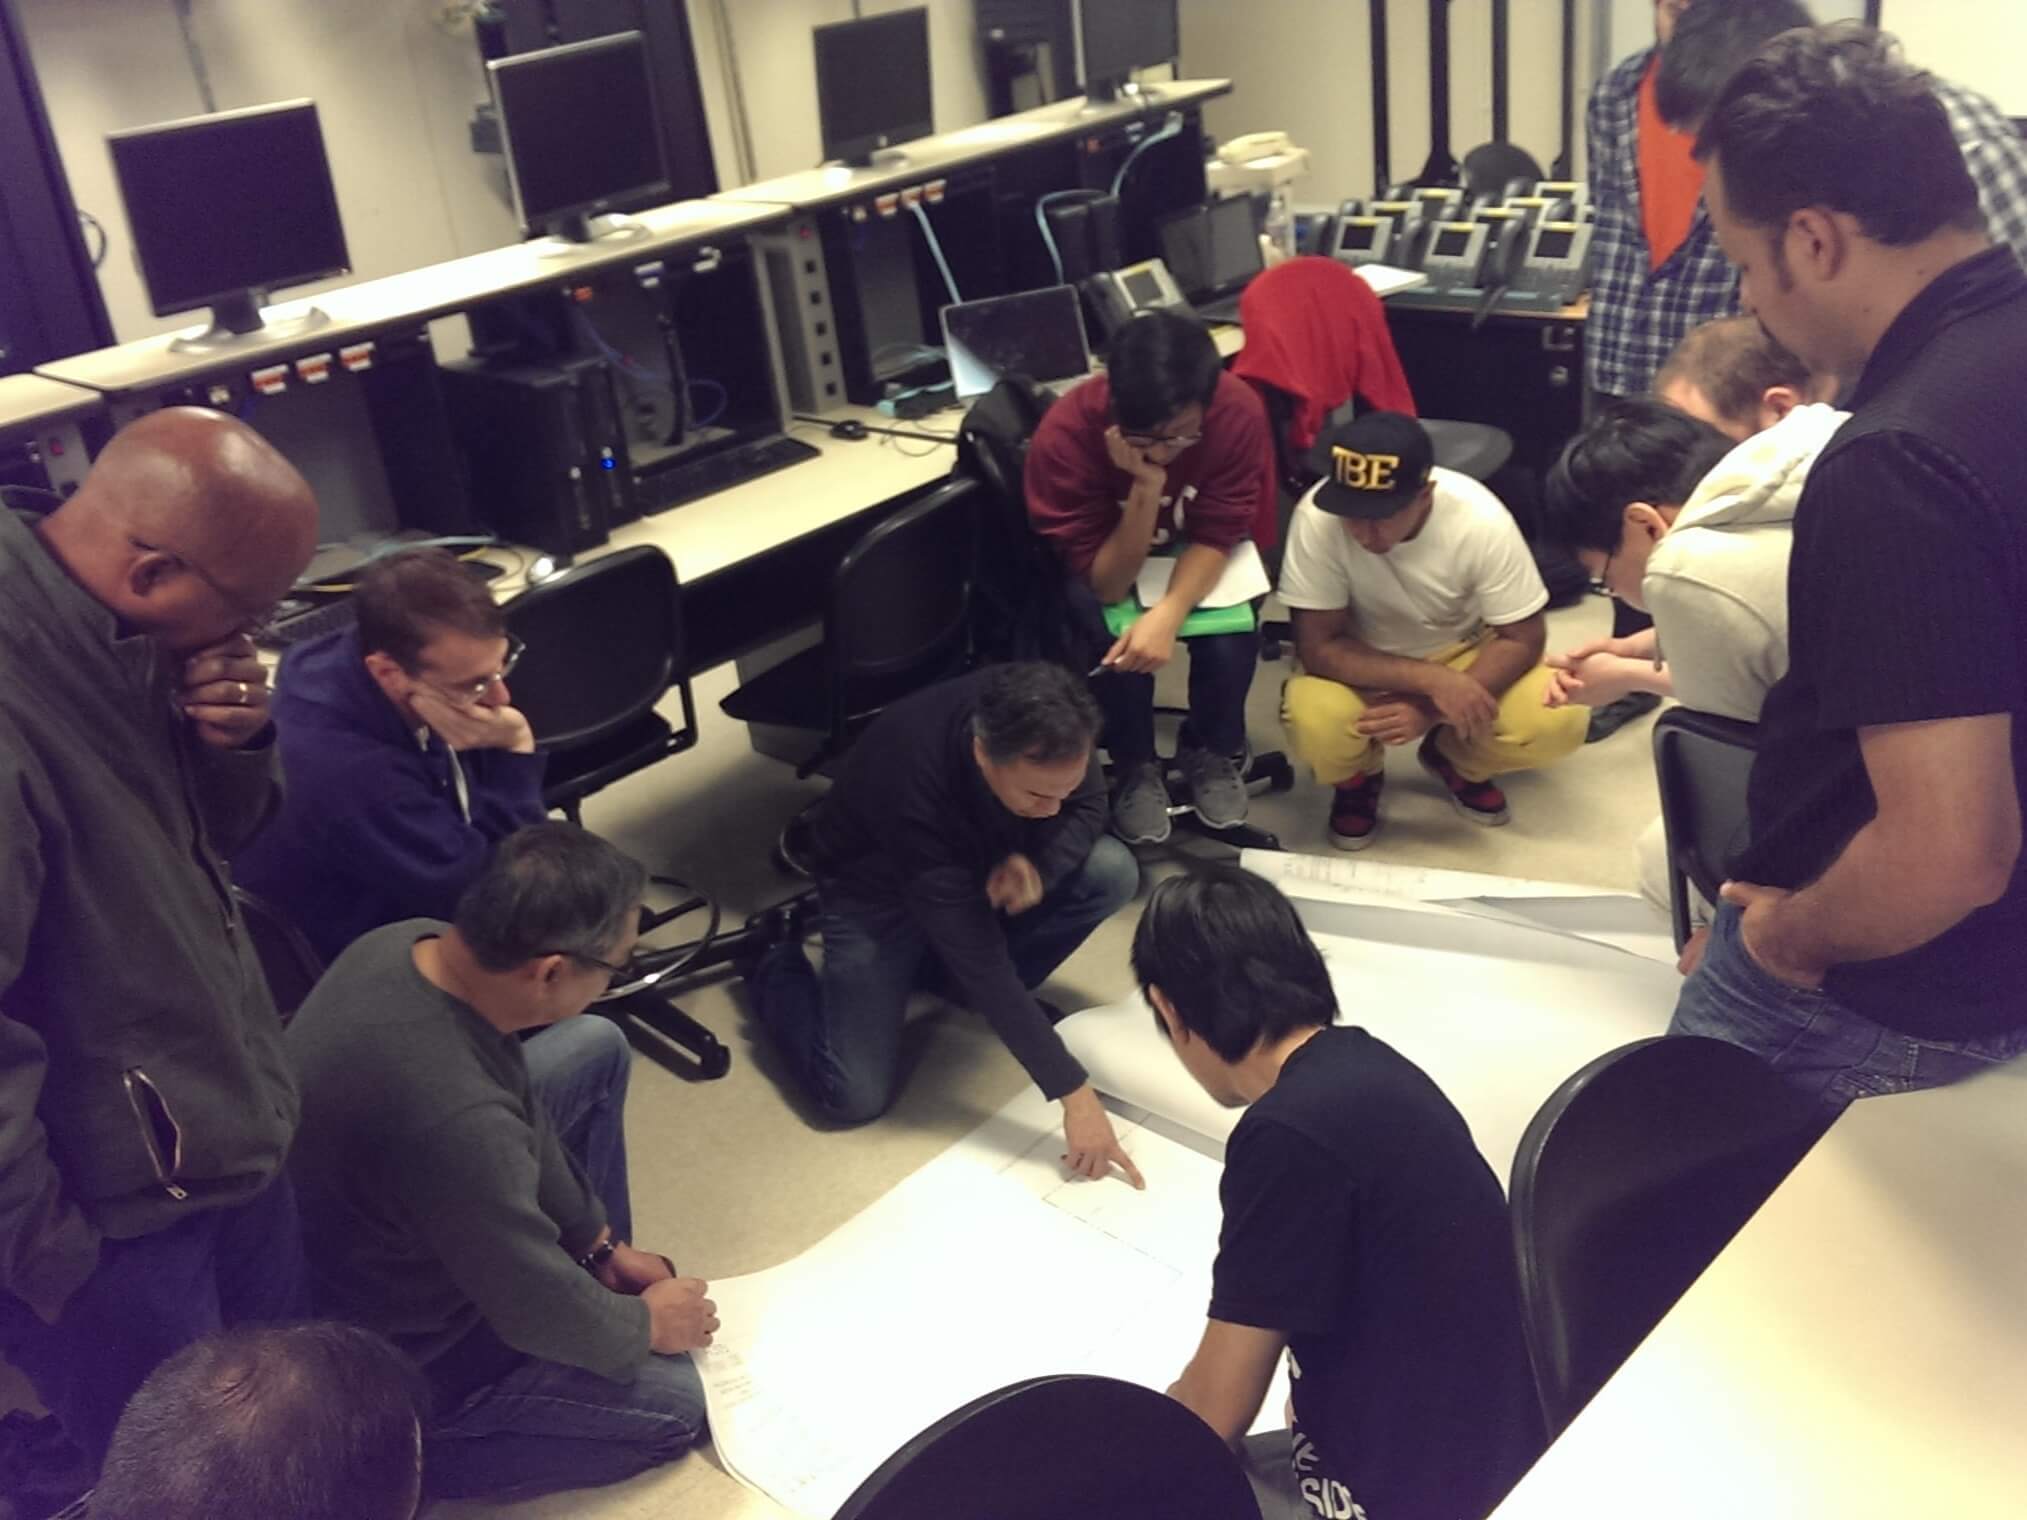 The class gathers around a set of blueprints spread out on the floor